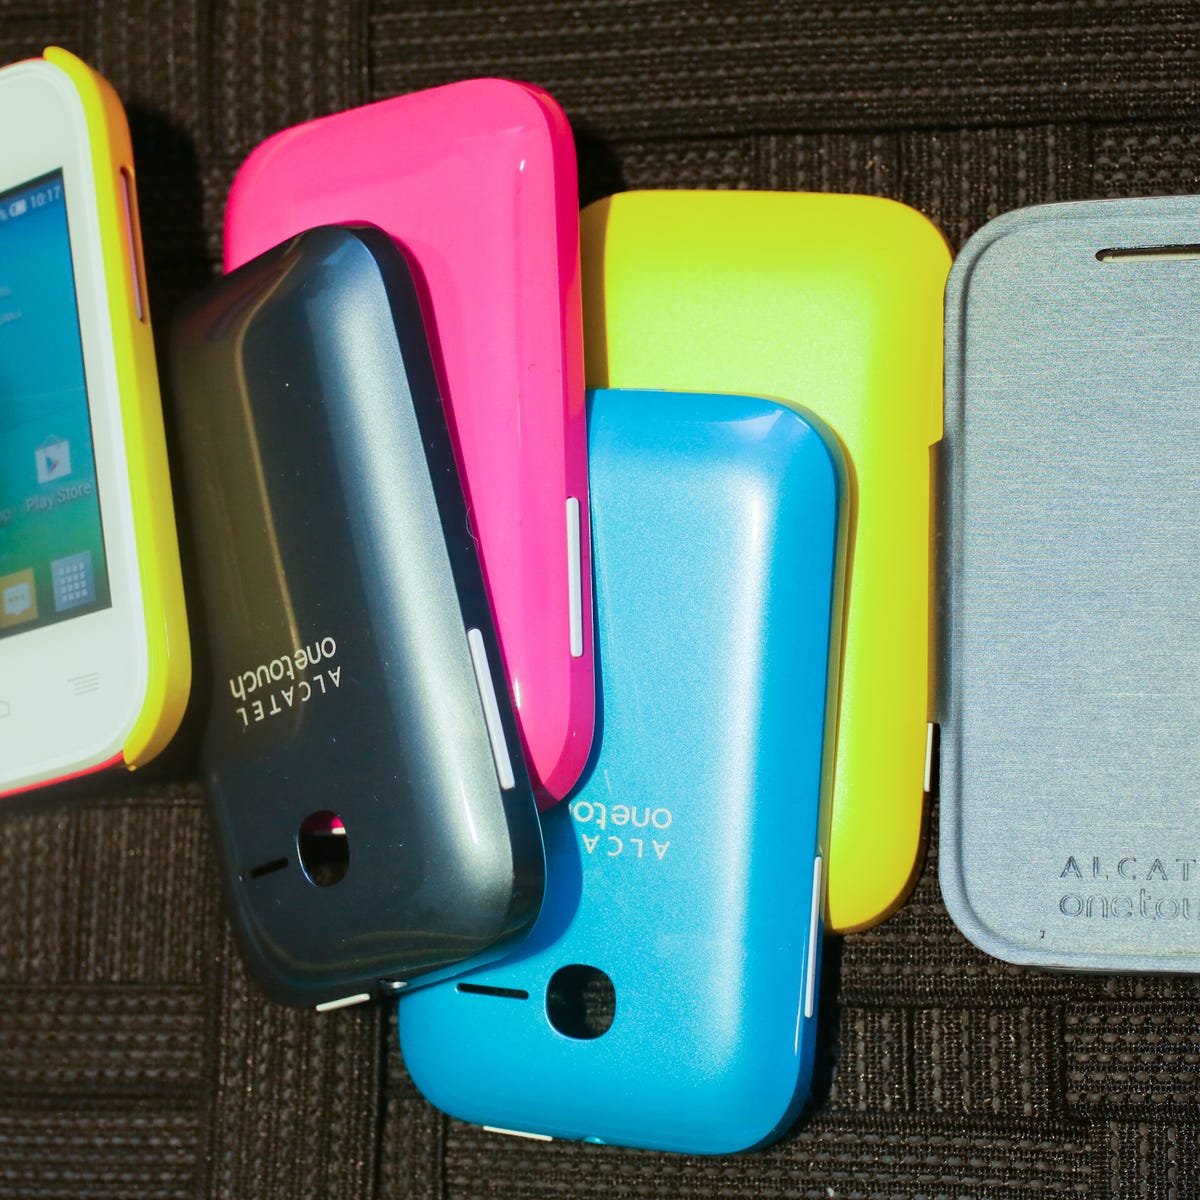 Alcatel One Touch Pop Fit review: The Alcatel One Touch Pop Fit is